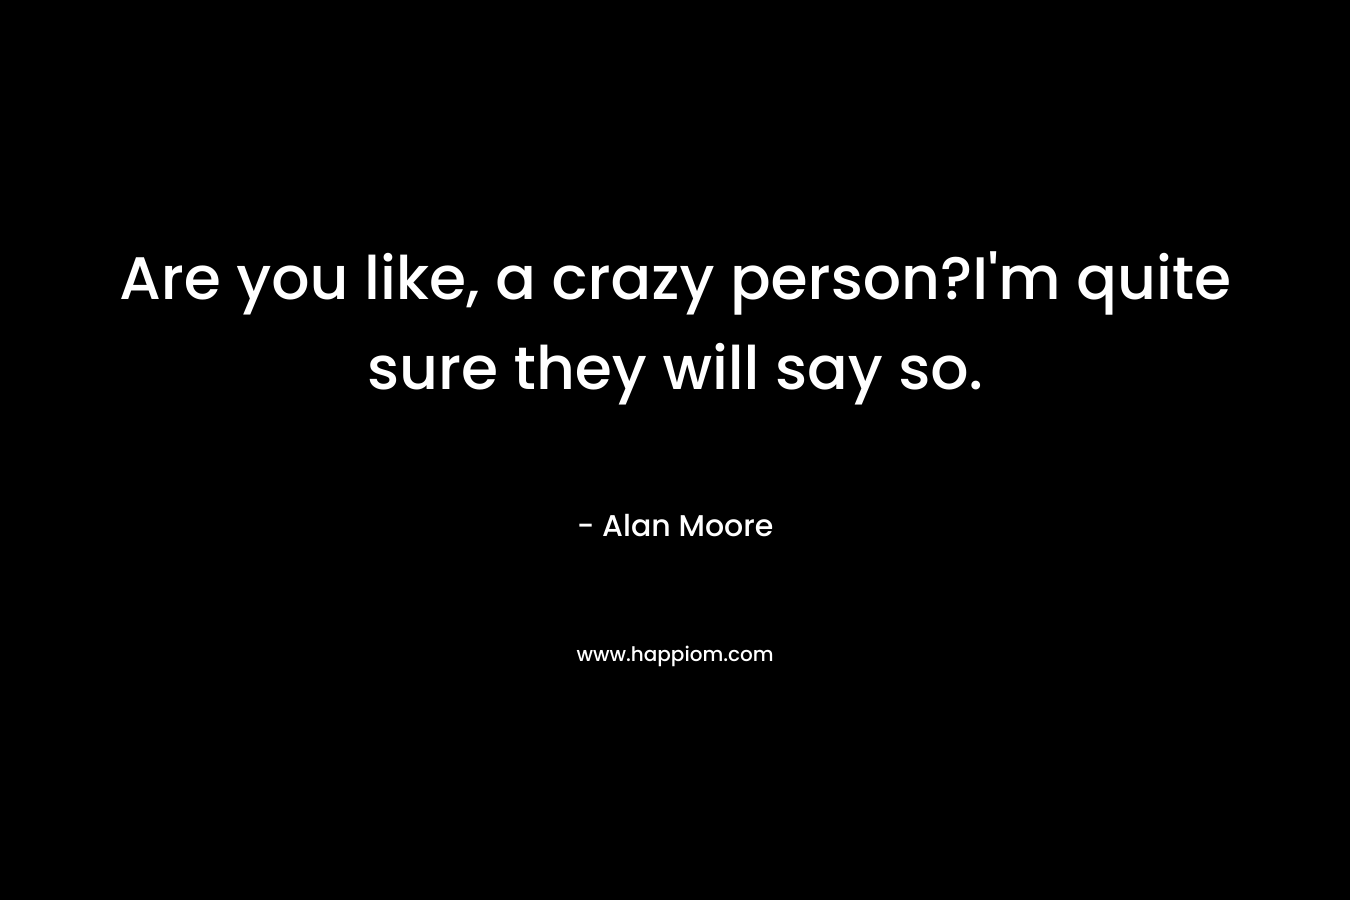 Are you like, a crazy person?I'm quite sure they will say so.